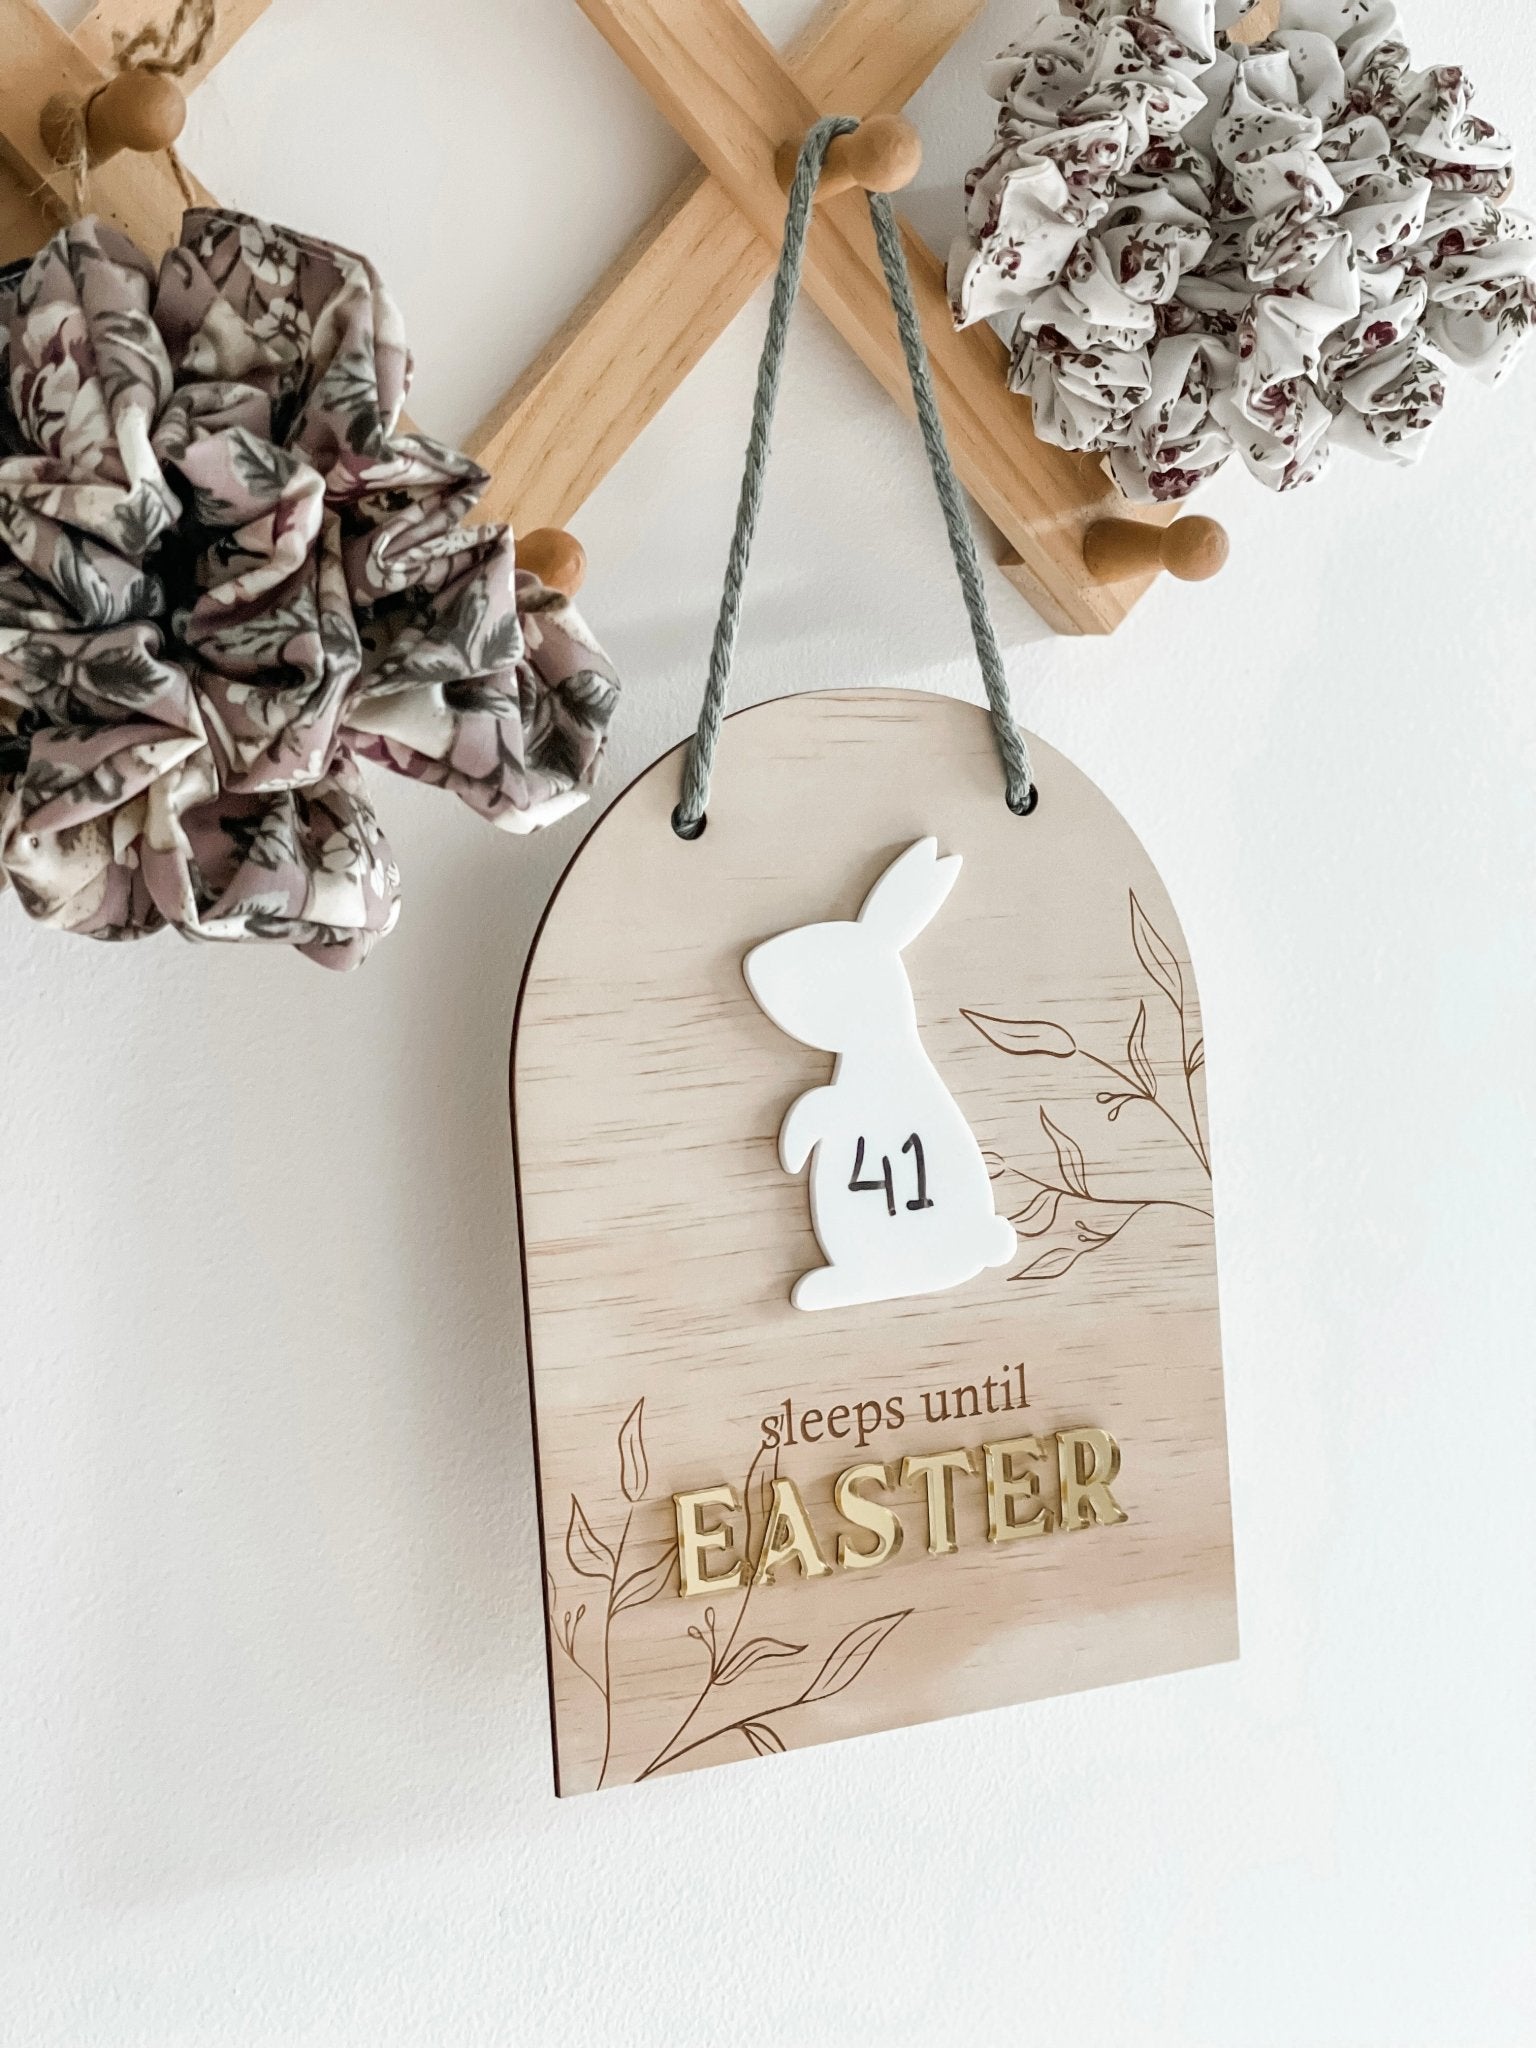 Sleeps until Easter - The Humble Gift Co.